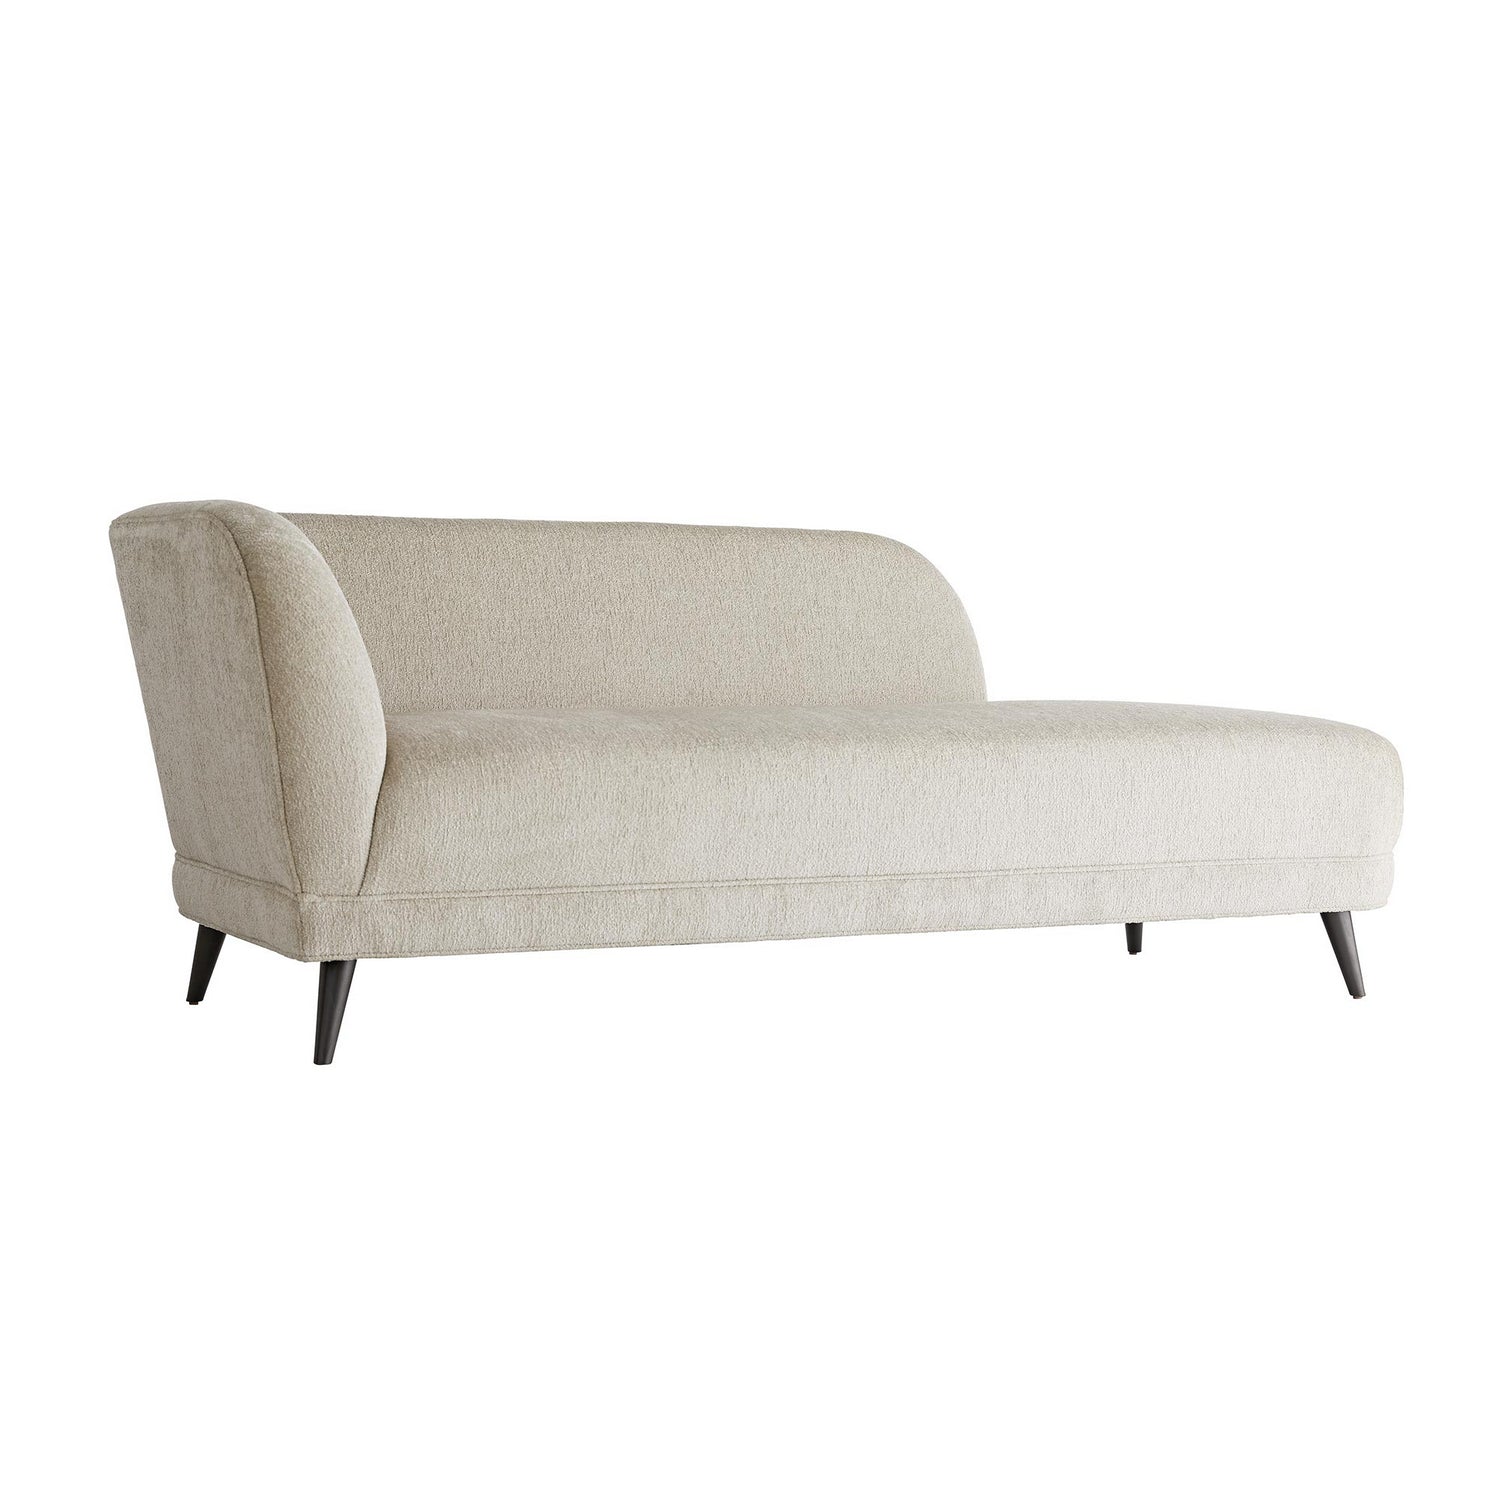 Chaise from the Catalina collection in Stone finish